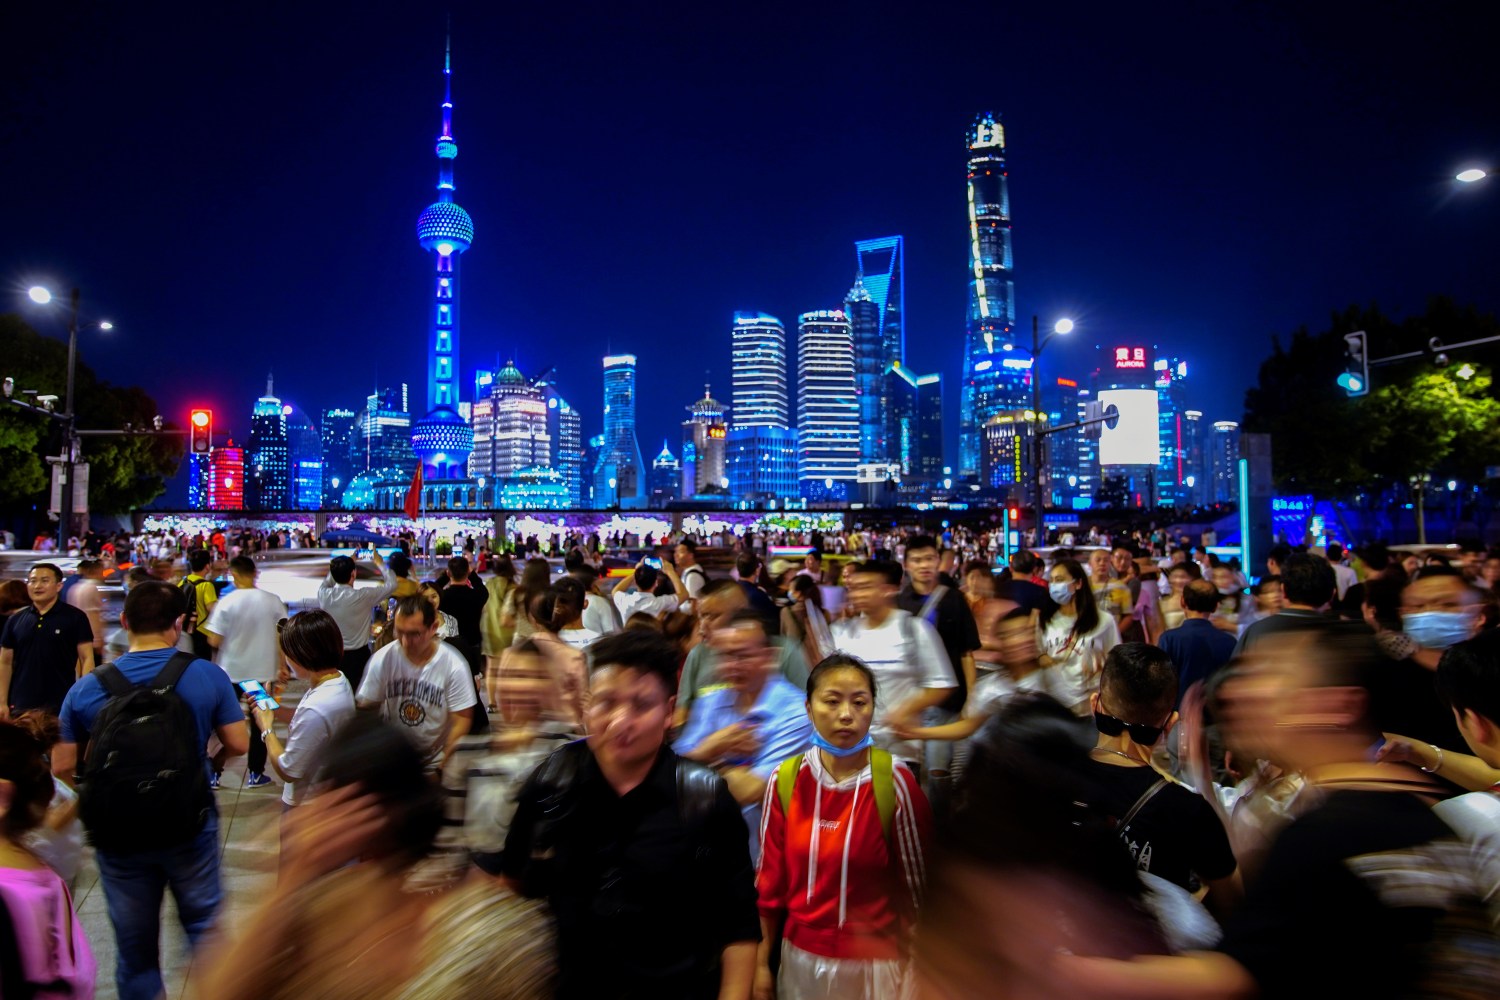 People walk along near the Bund, in front of Lujiazui financial district of Pudong, following the outbreak of the coronavirus disease (COVID-19), in Shanghai, China May 10, 2021. REUTERS/Aly Song